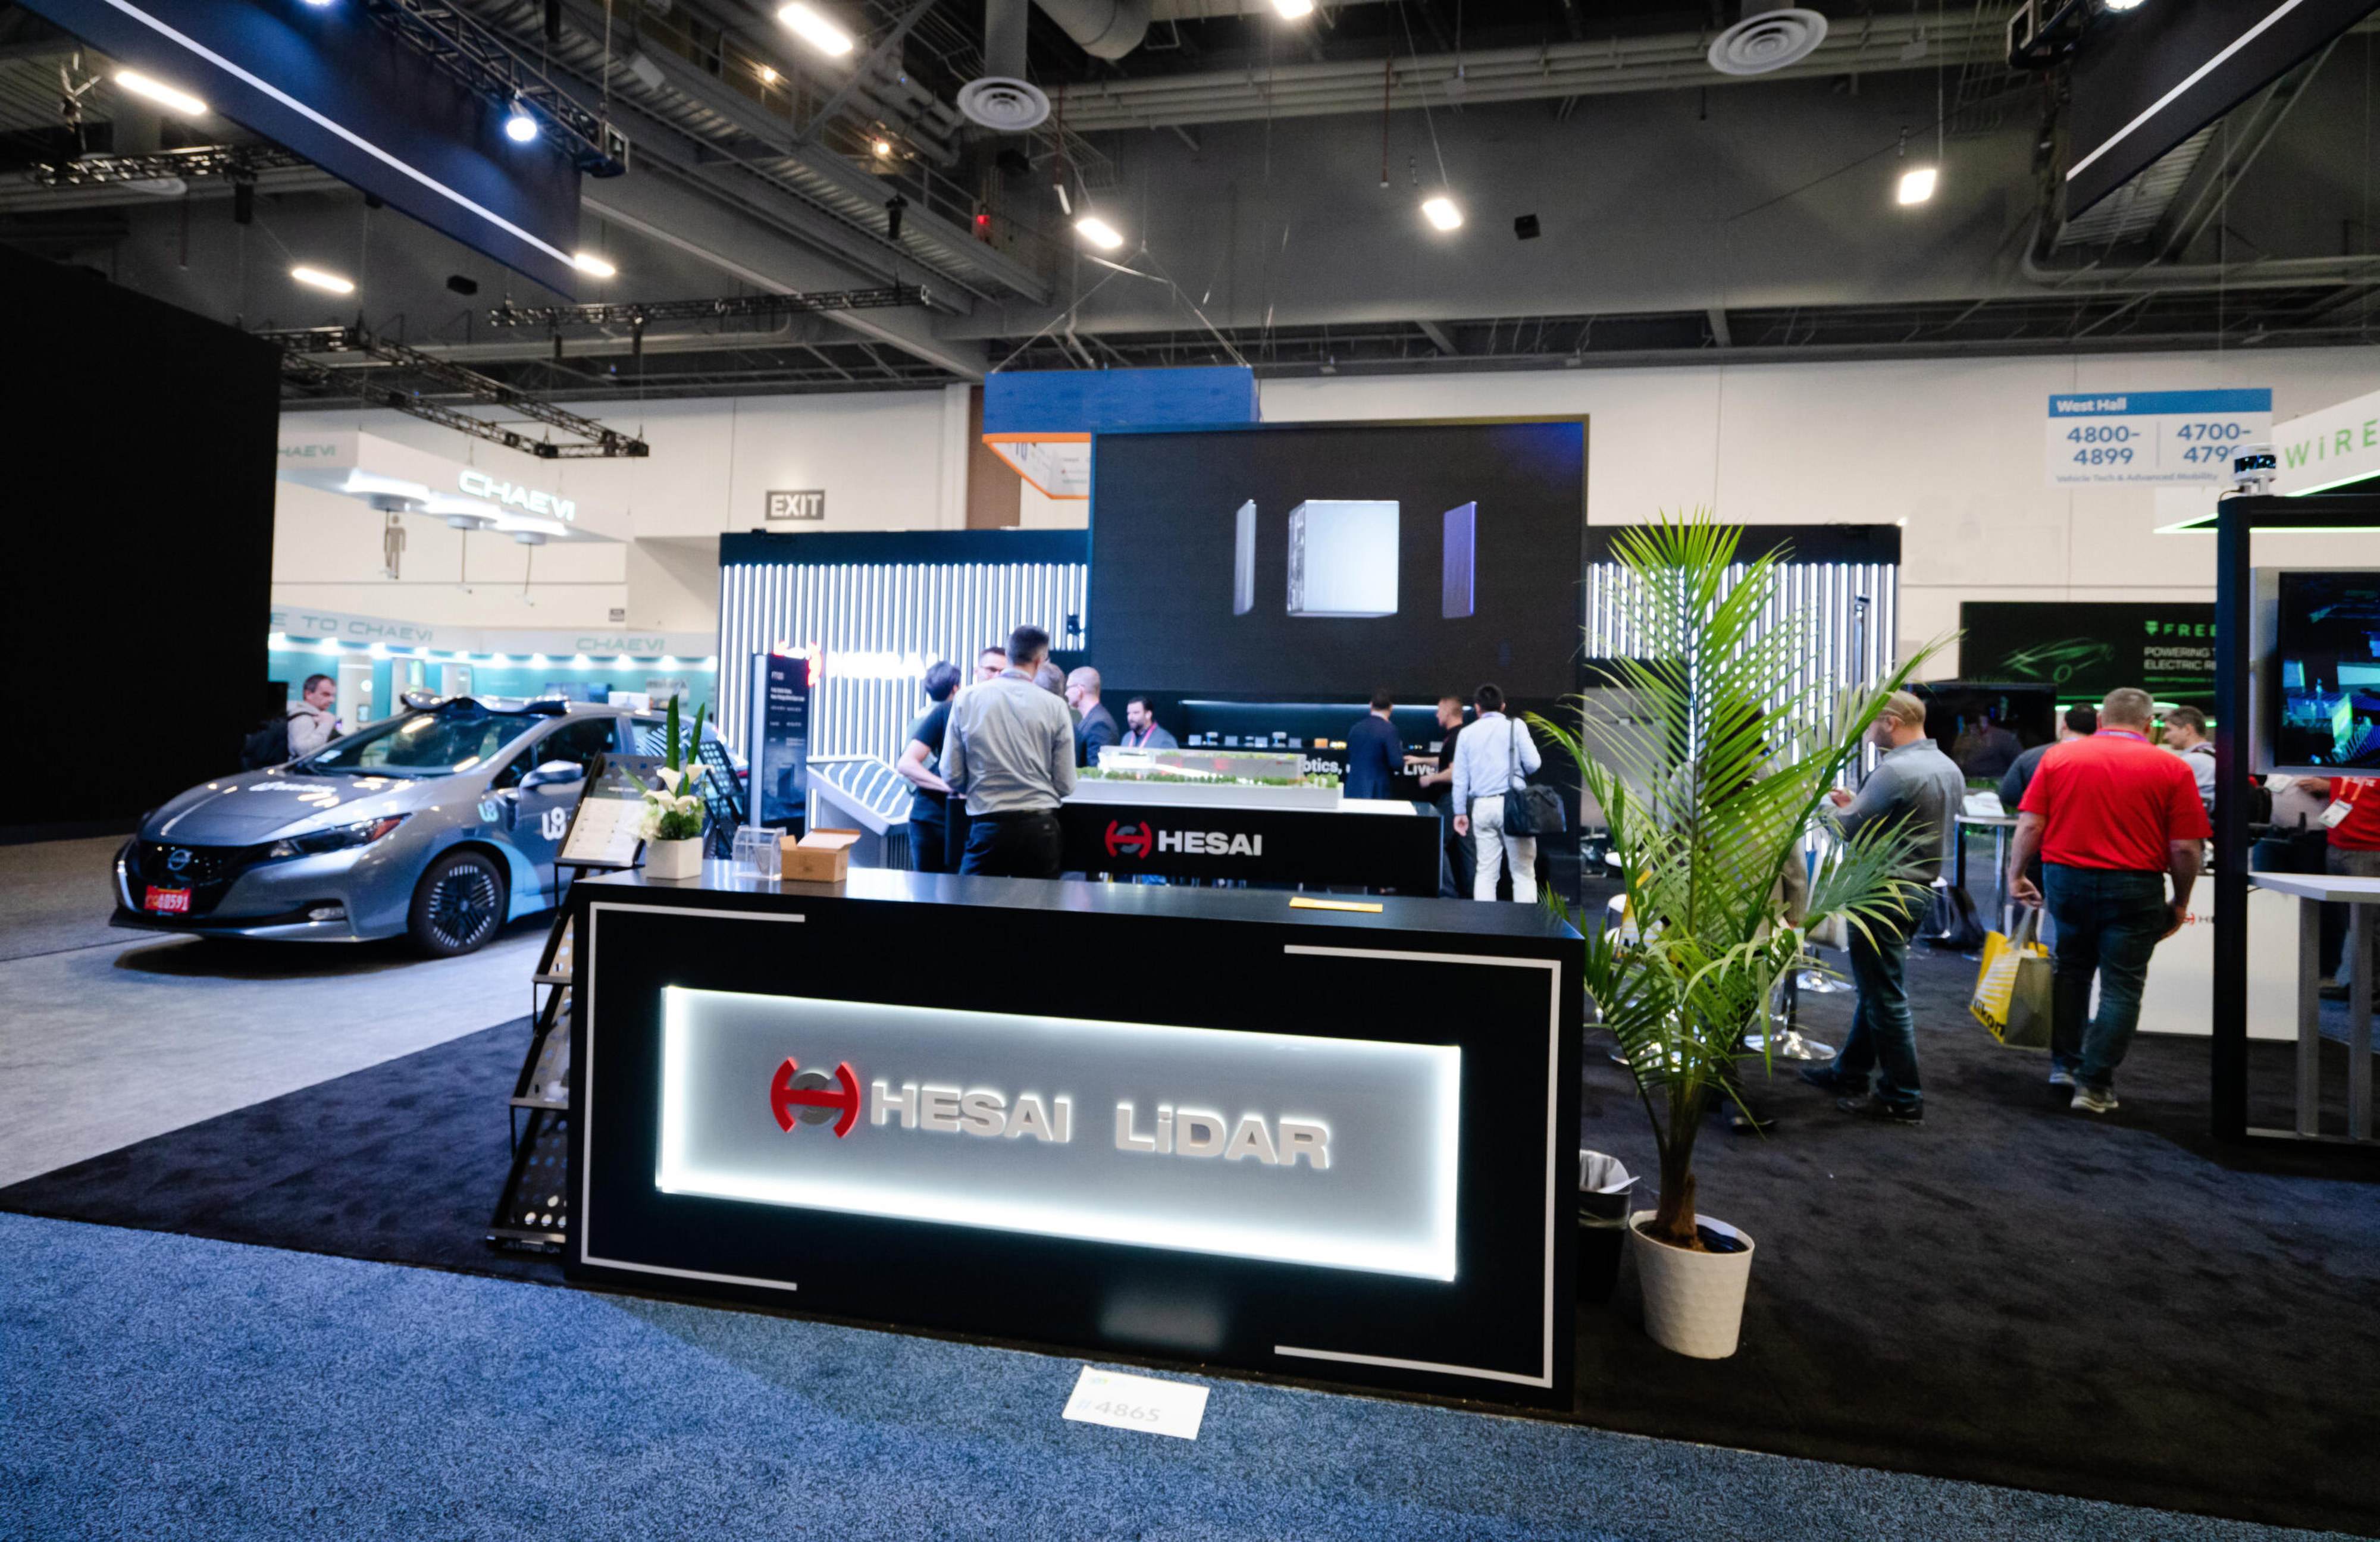 A Hesai Group booth at an auto-industry trade show. Photo: Handout